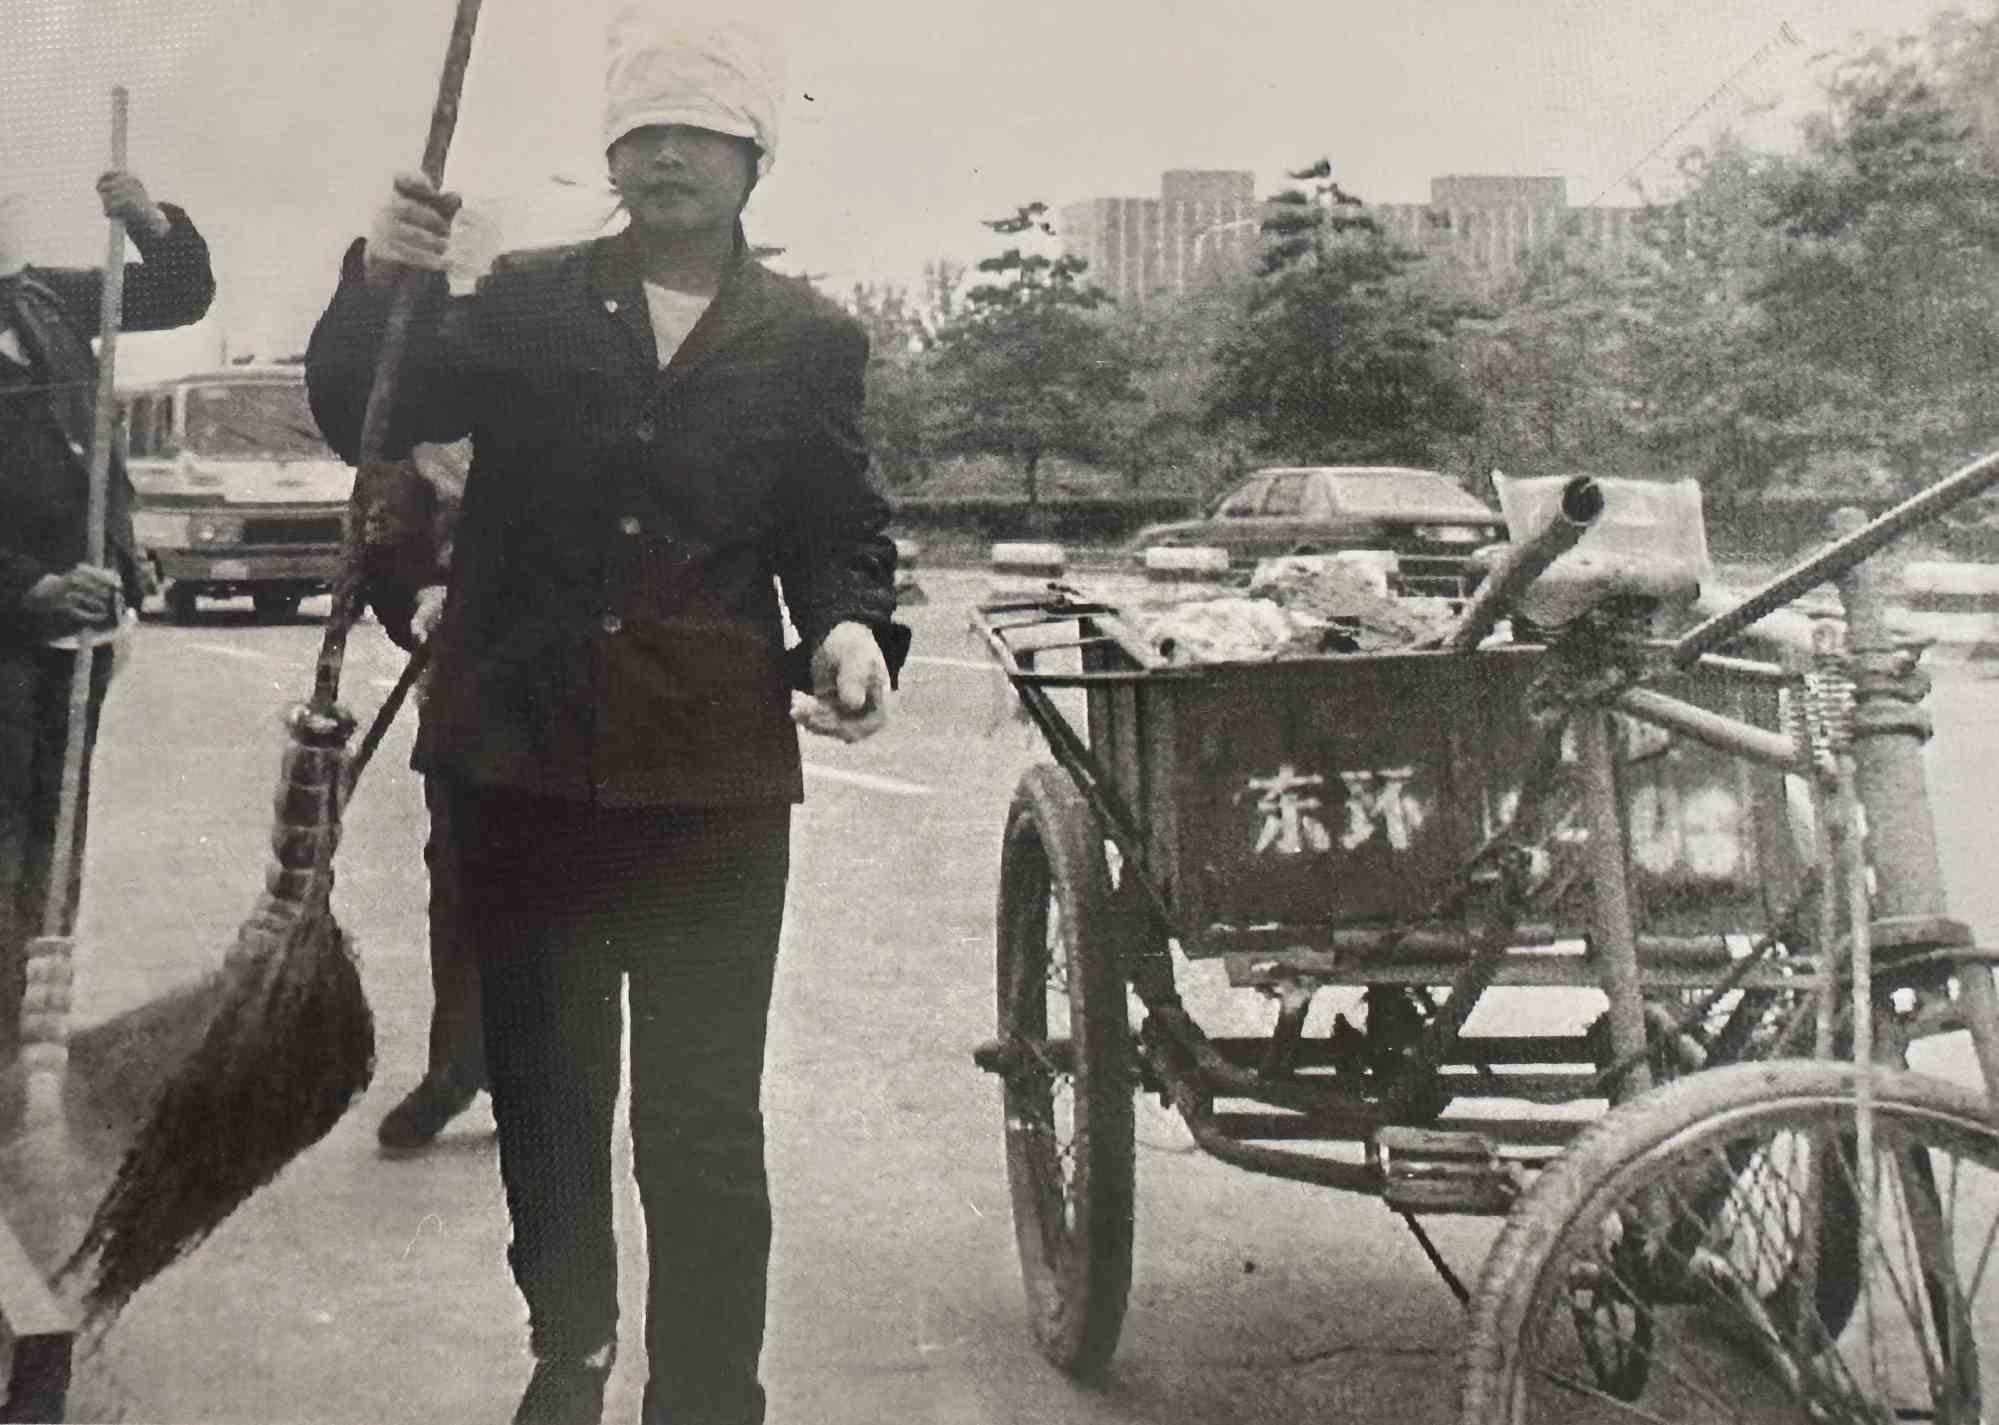 Unknown Figurative Photograph - Historical Photo - China, Beijing - Mid-20th Century